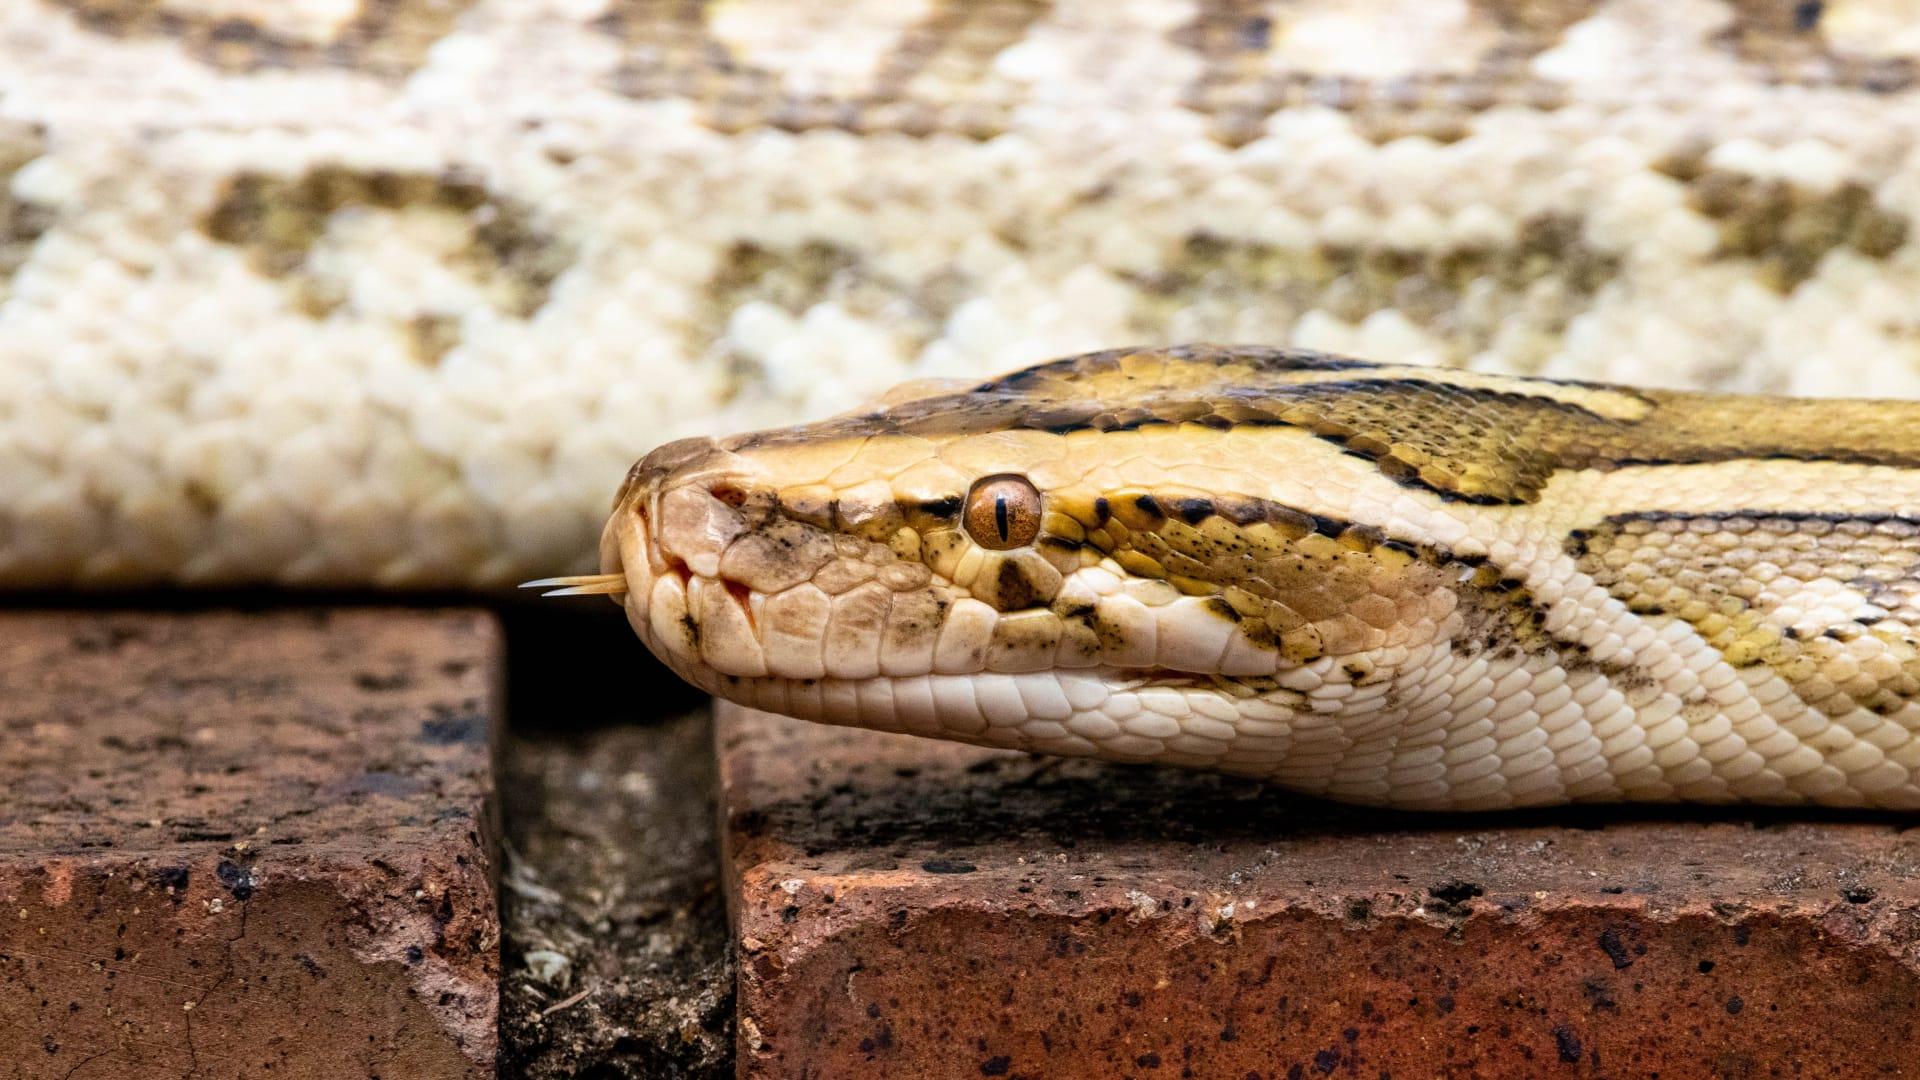 Burmese python pictures